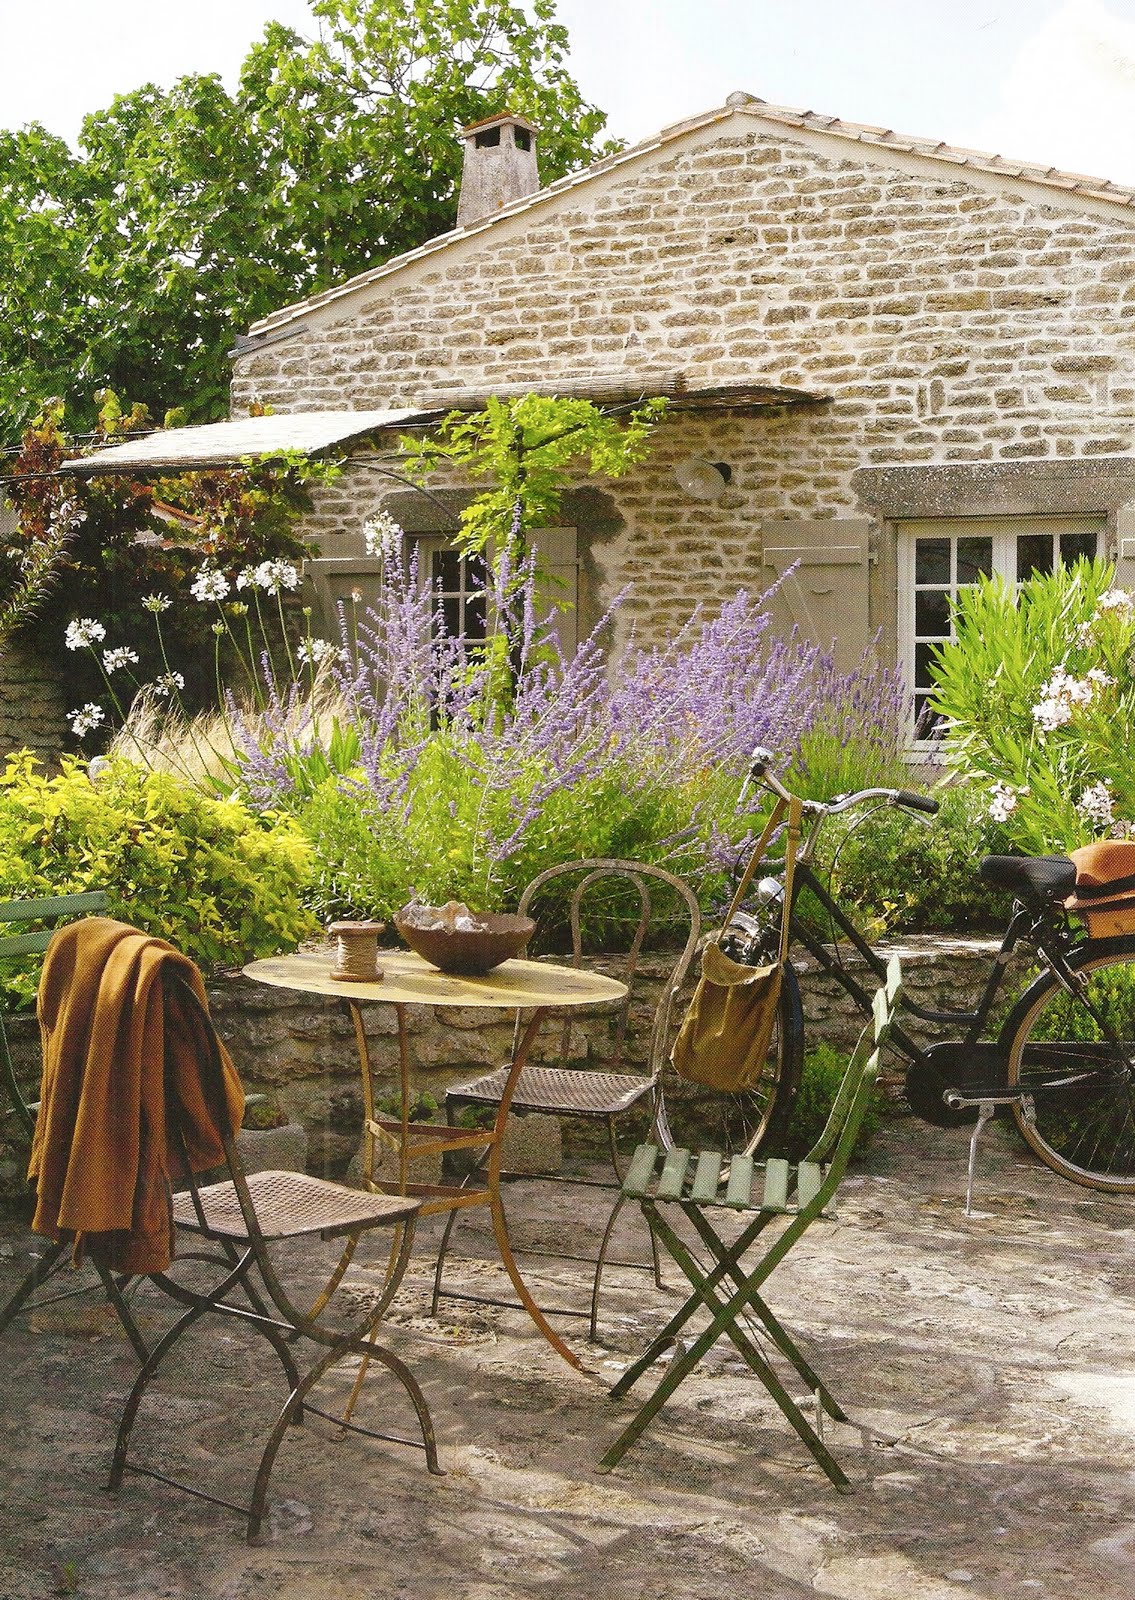 Décor de Provence: More Inspiration from Provence!